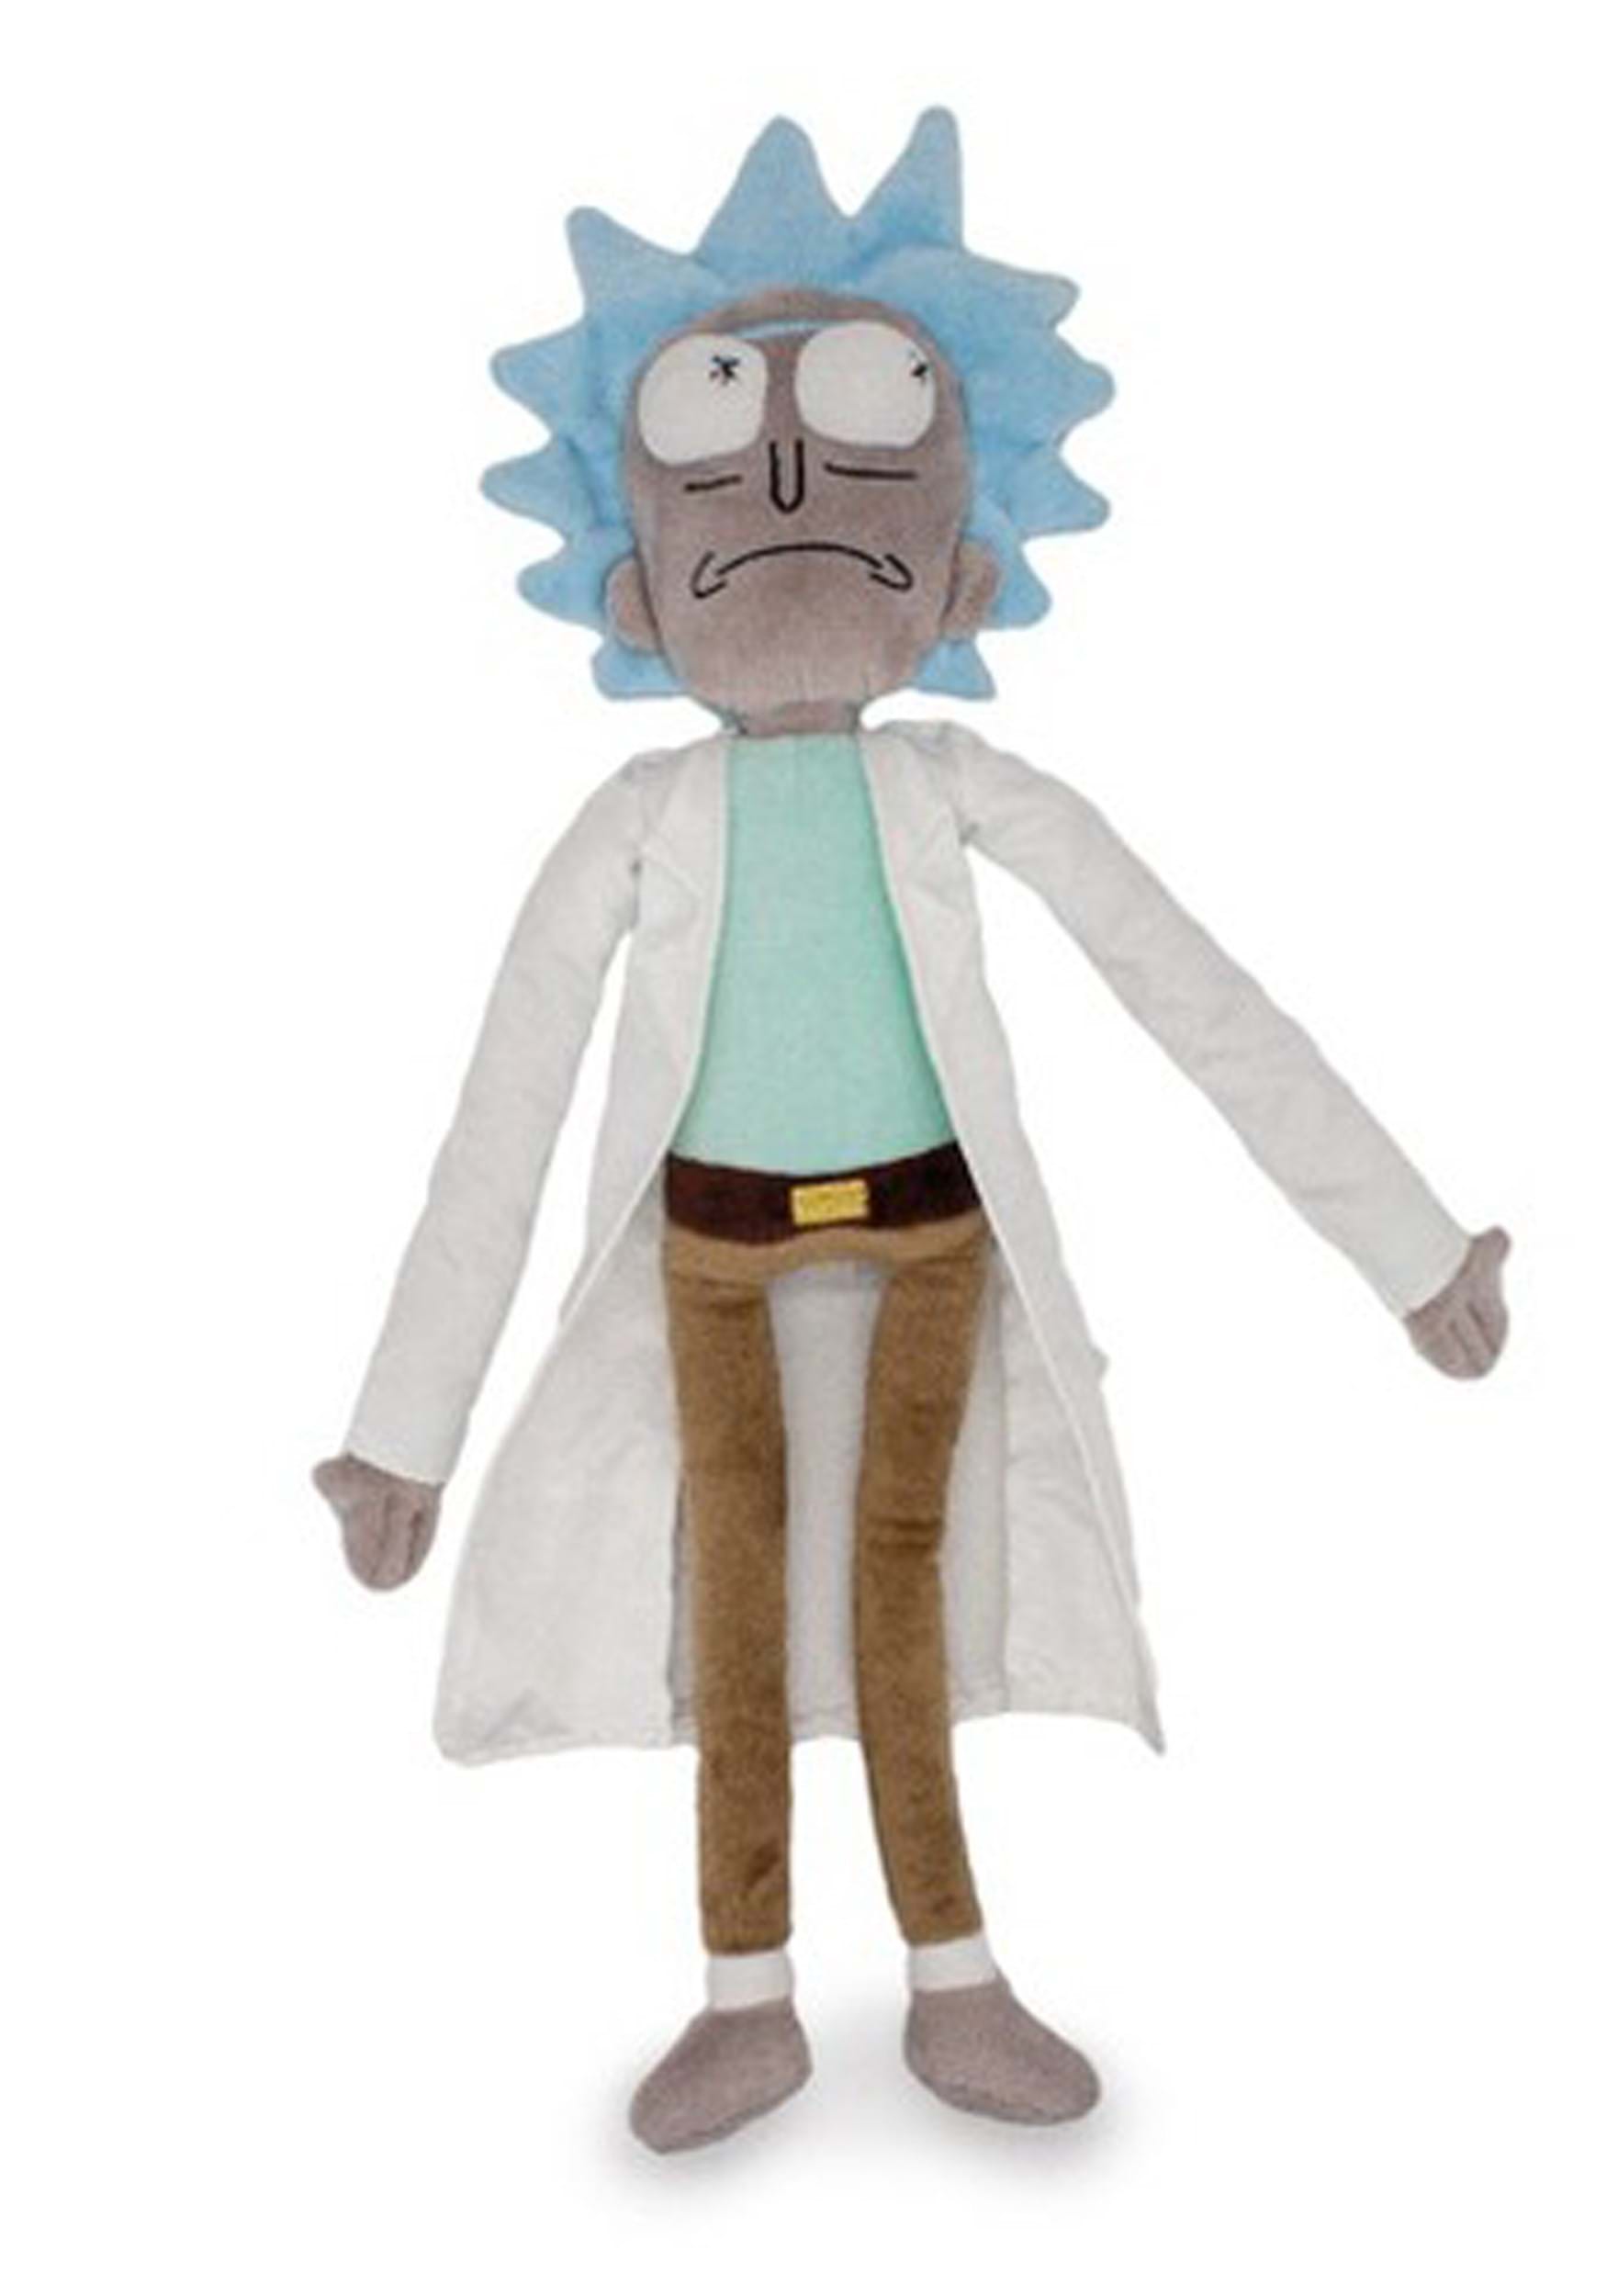 Rick Squeaker Dog Toy from Rick and Morty